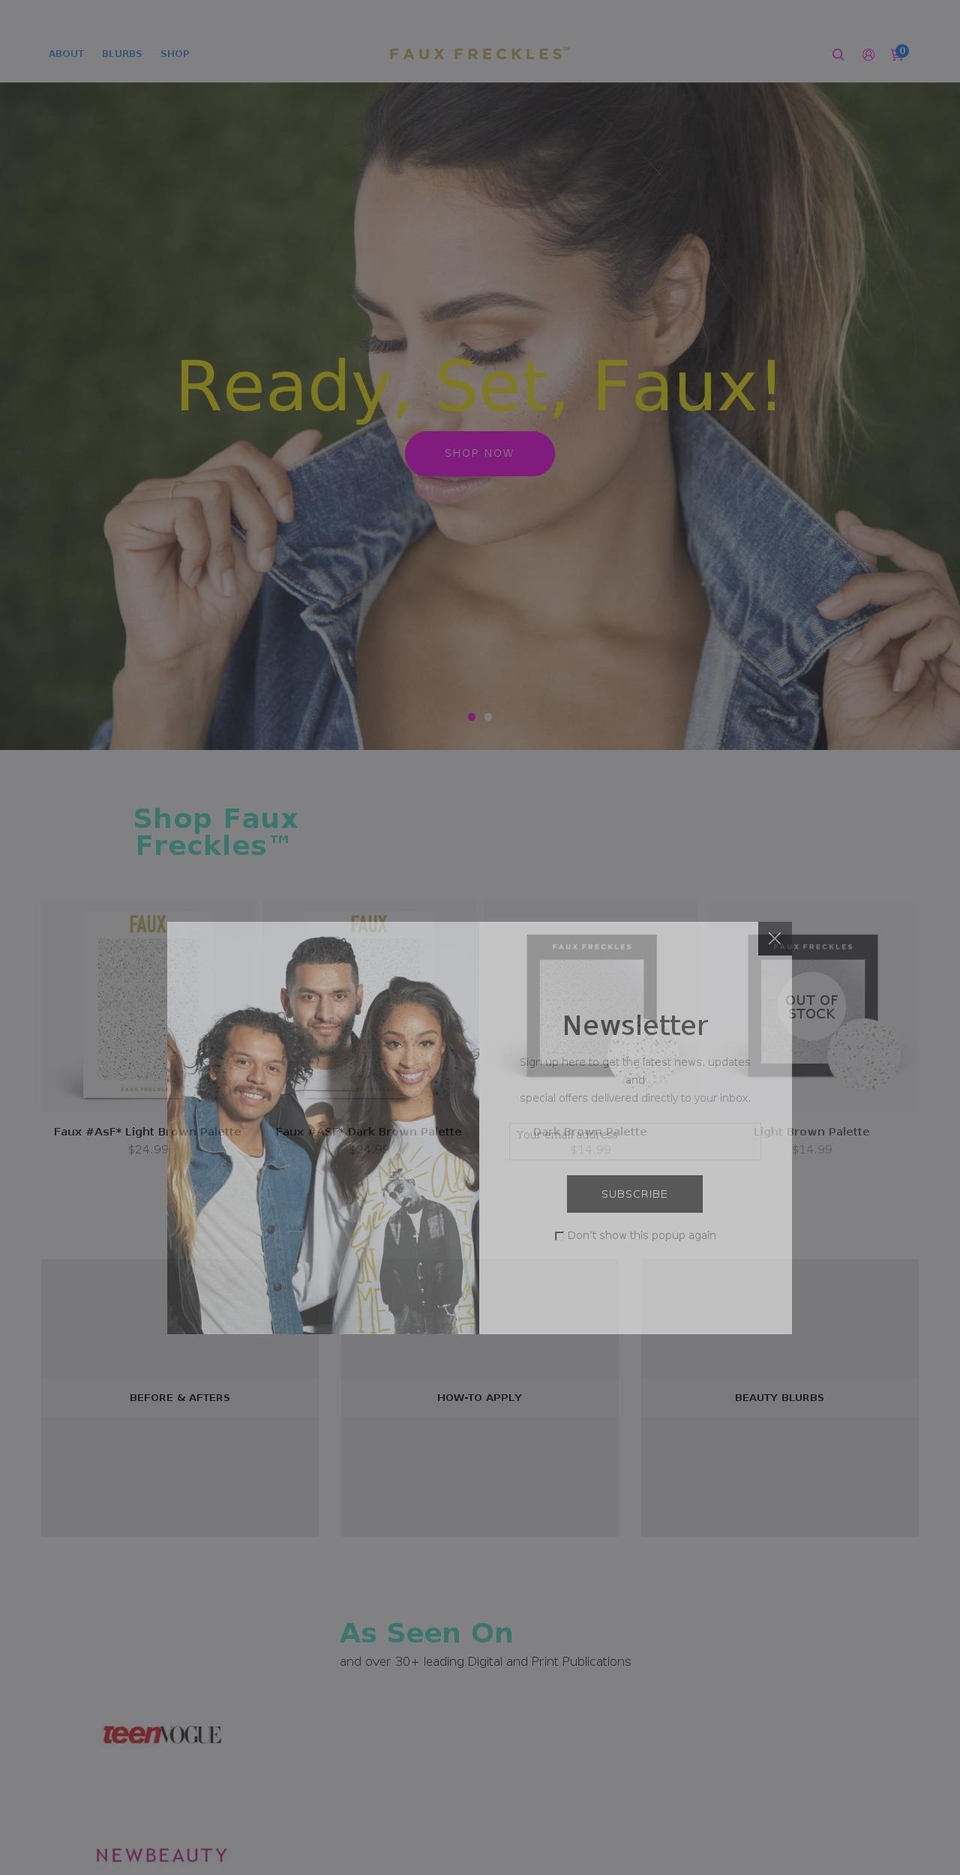 cleversoft-ione-myshopify-3-6-0 Shopify theme site example fauxfreckles.com